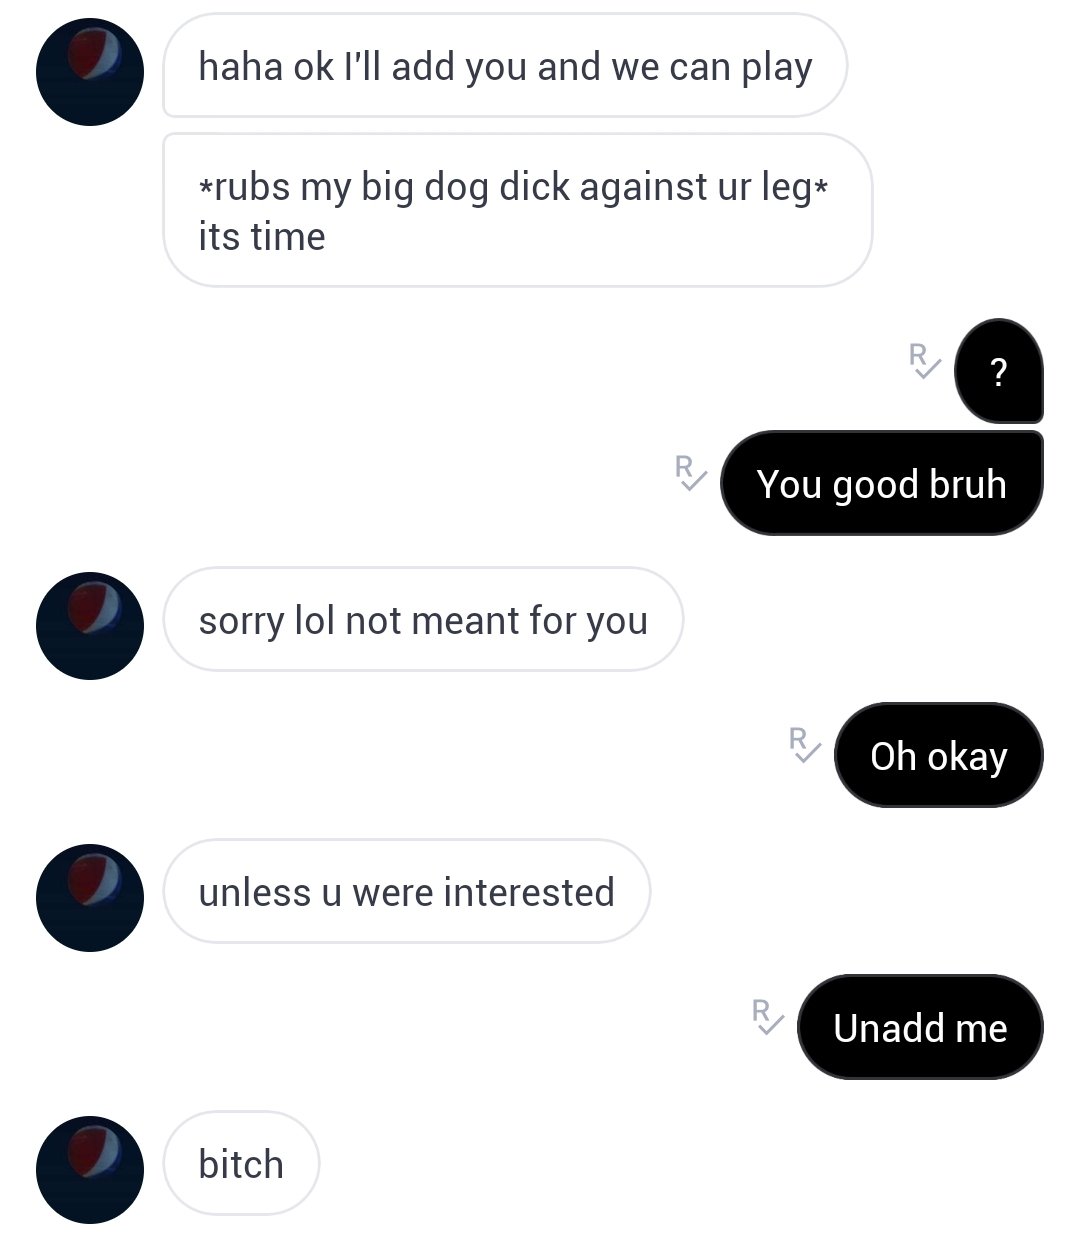 angle - haha ok I'll add you and we can play rubs my big dog dick against ur leg its time R ? You good bruh sorry lol not meant for you Ri Oh okay unless u were interested R Unadd me bitch